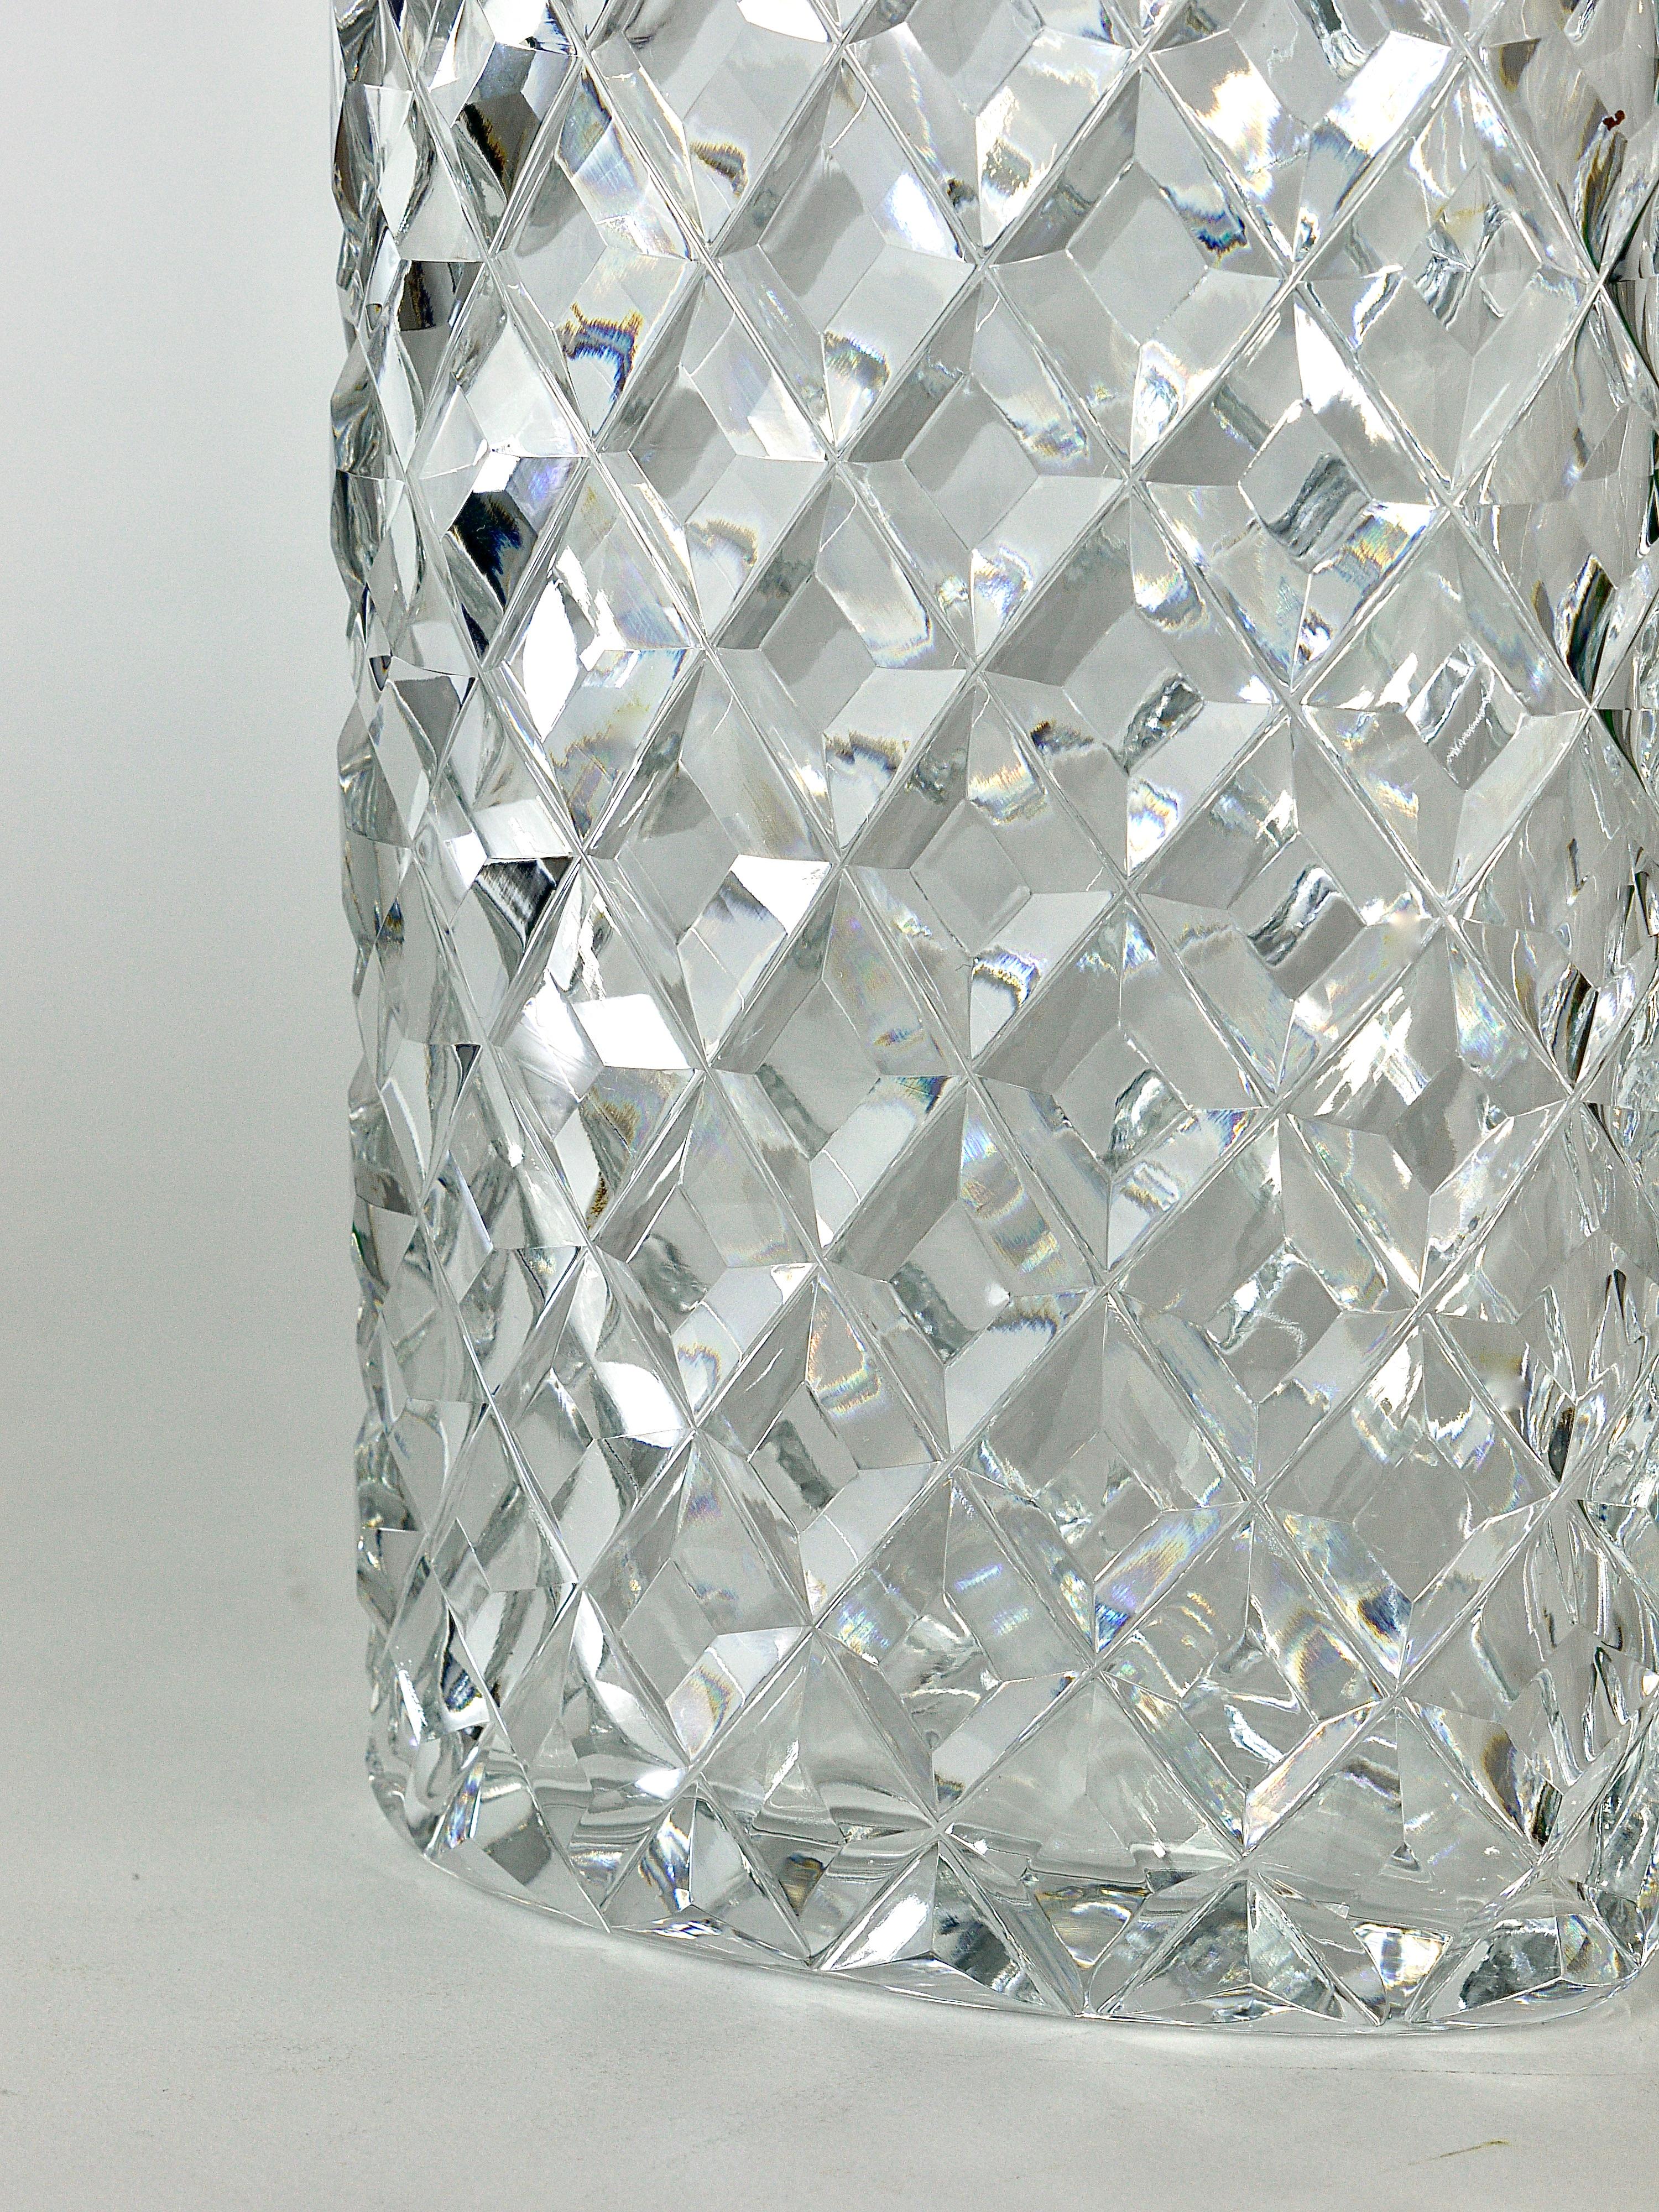 Sparkling Facetted Crystal Glass Vase by Claus Josef Riedel, Austria, 1970s For Sale 1